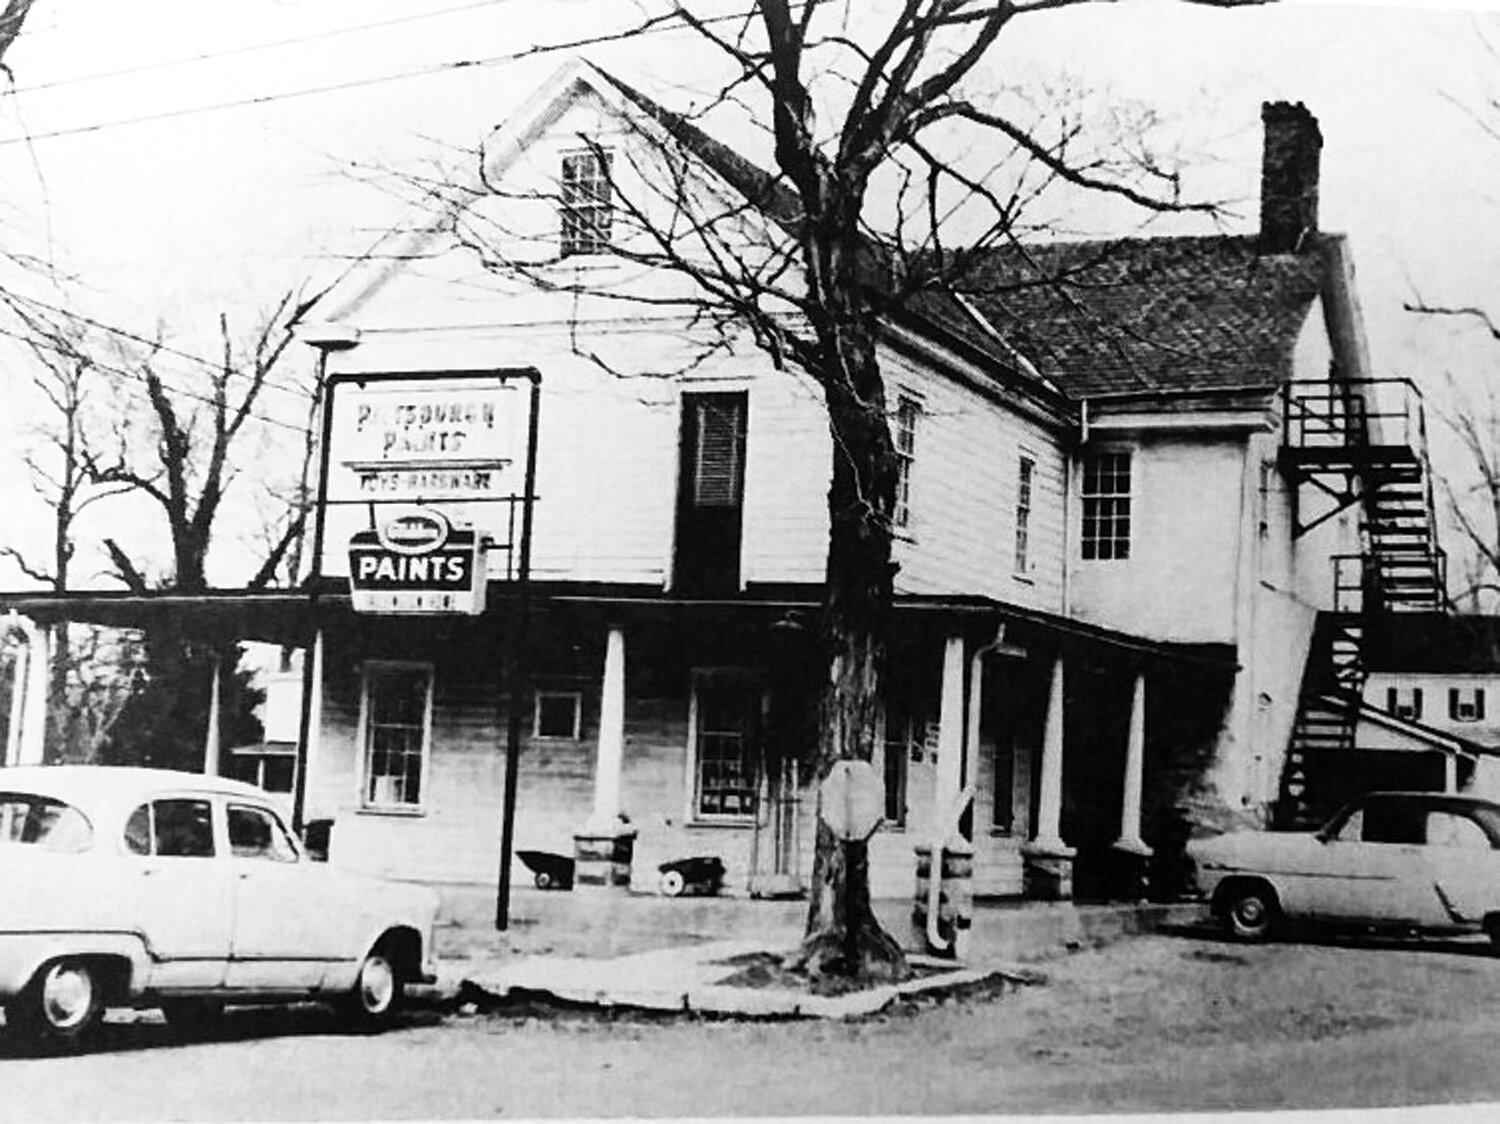 A view of the Fallsington Hardware store, circa 1950. The store had once been the landmark Stagecoach Tavern.